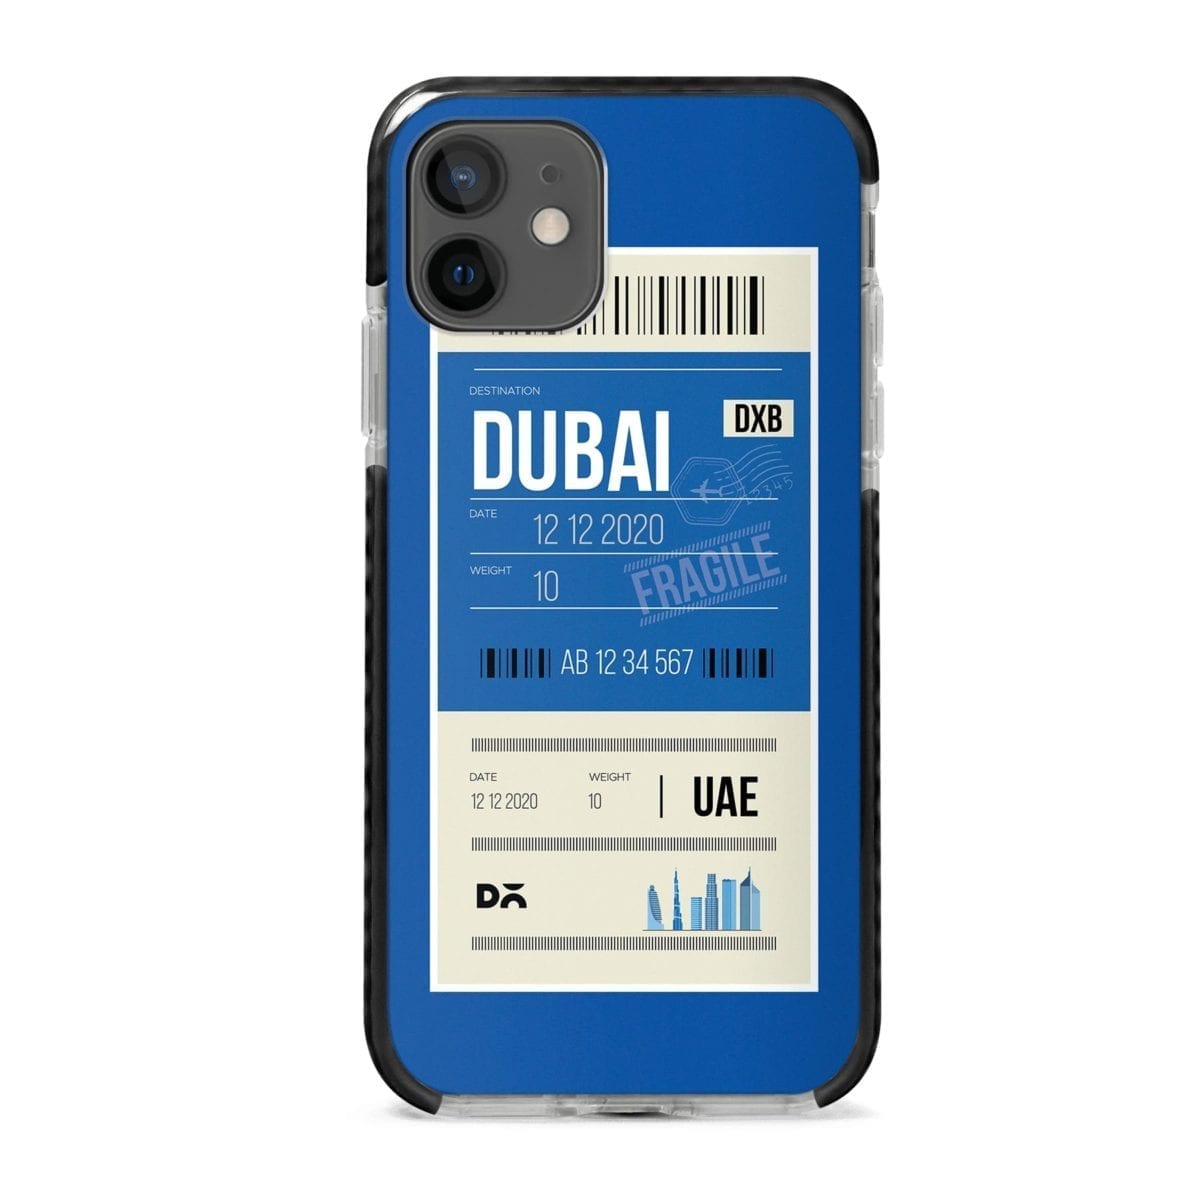 Dubai City Tag Stride Case Cover for Apple iPhone 12 Mini and Apple iPhone 12 with great design and shock proof | Klippik | Online Shopping | Kuwait UAE Saudi